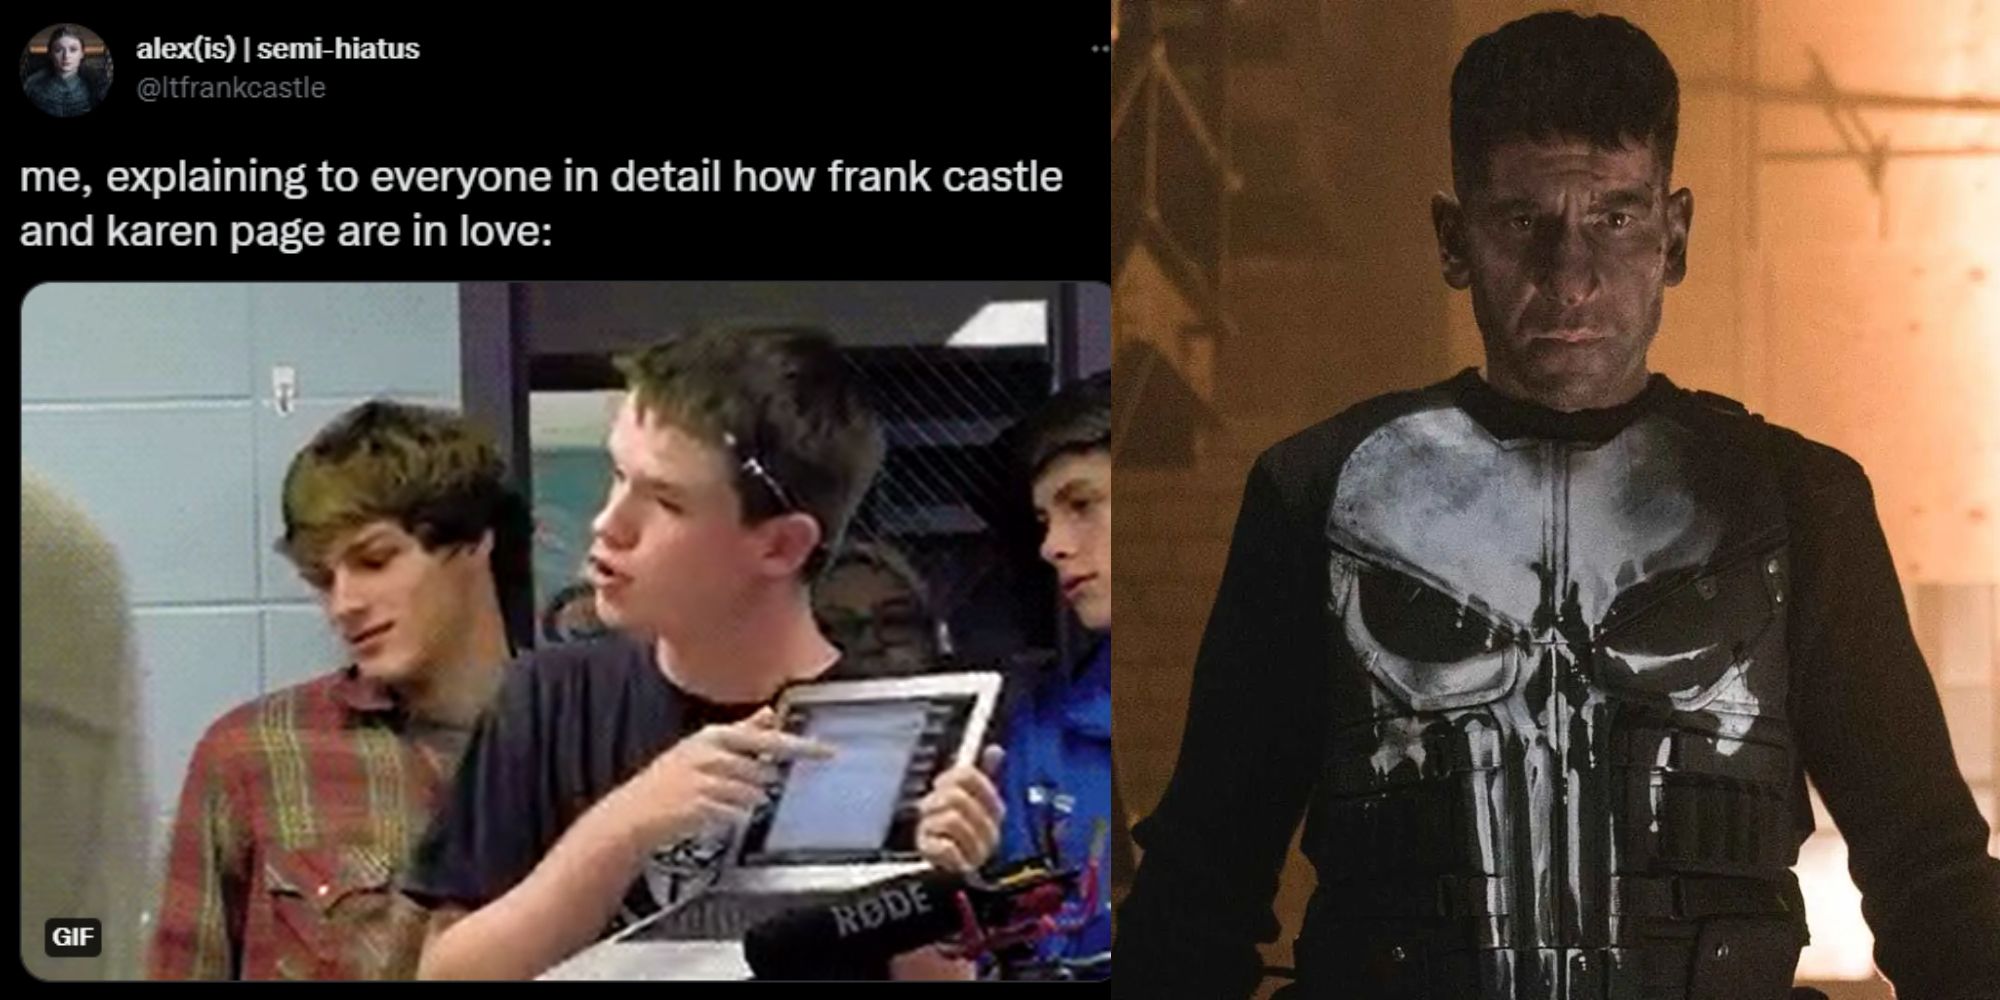 MEMES, Part 6: Call me The Punisher